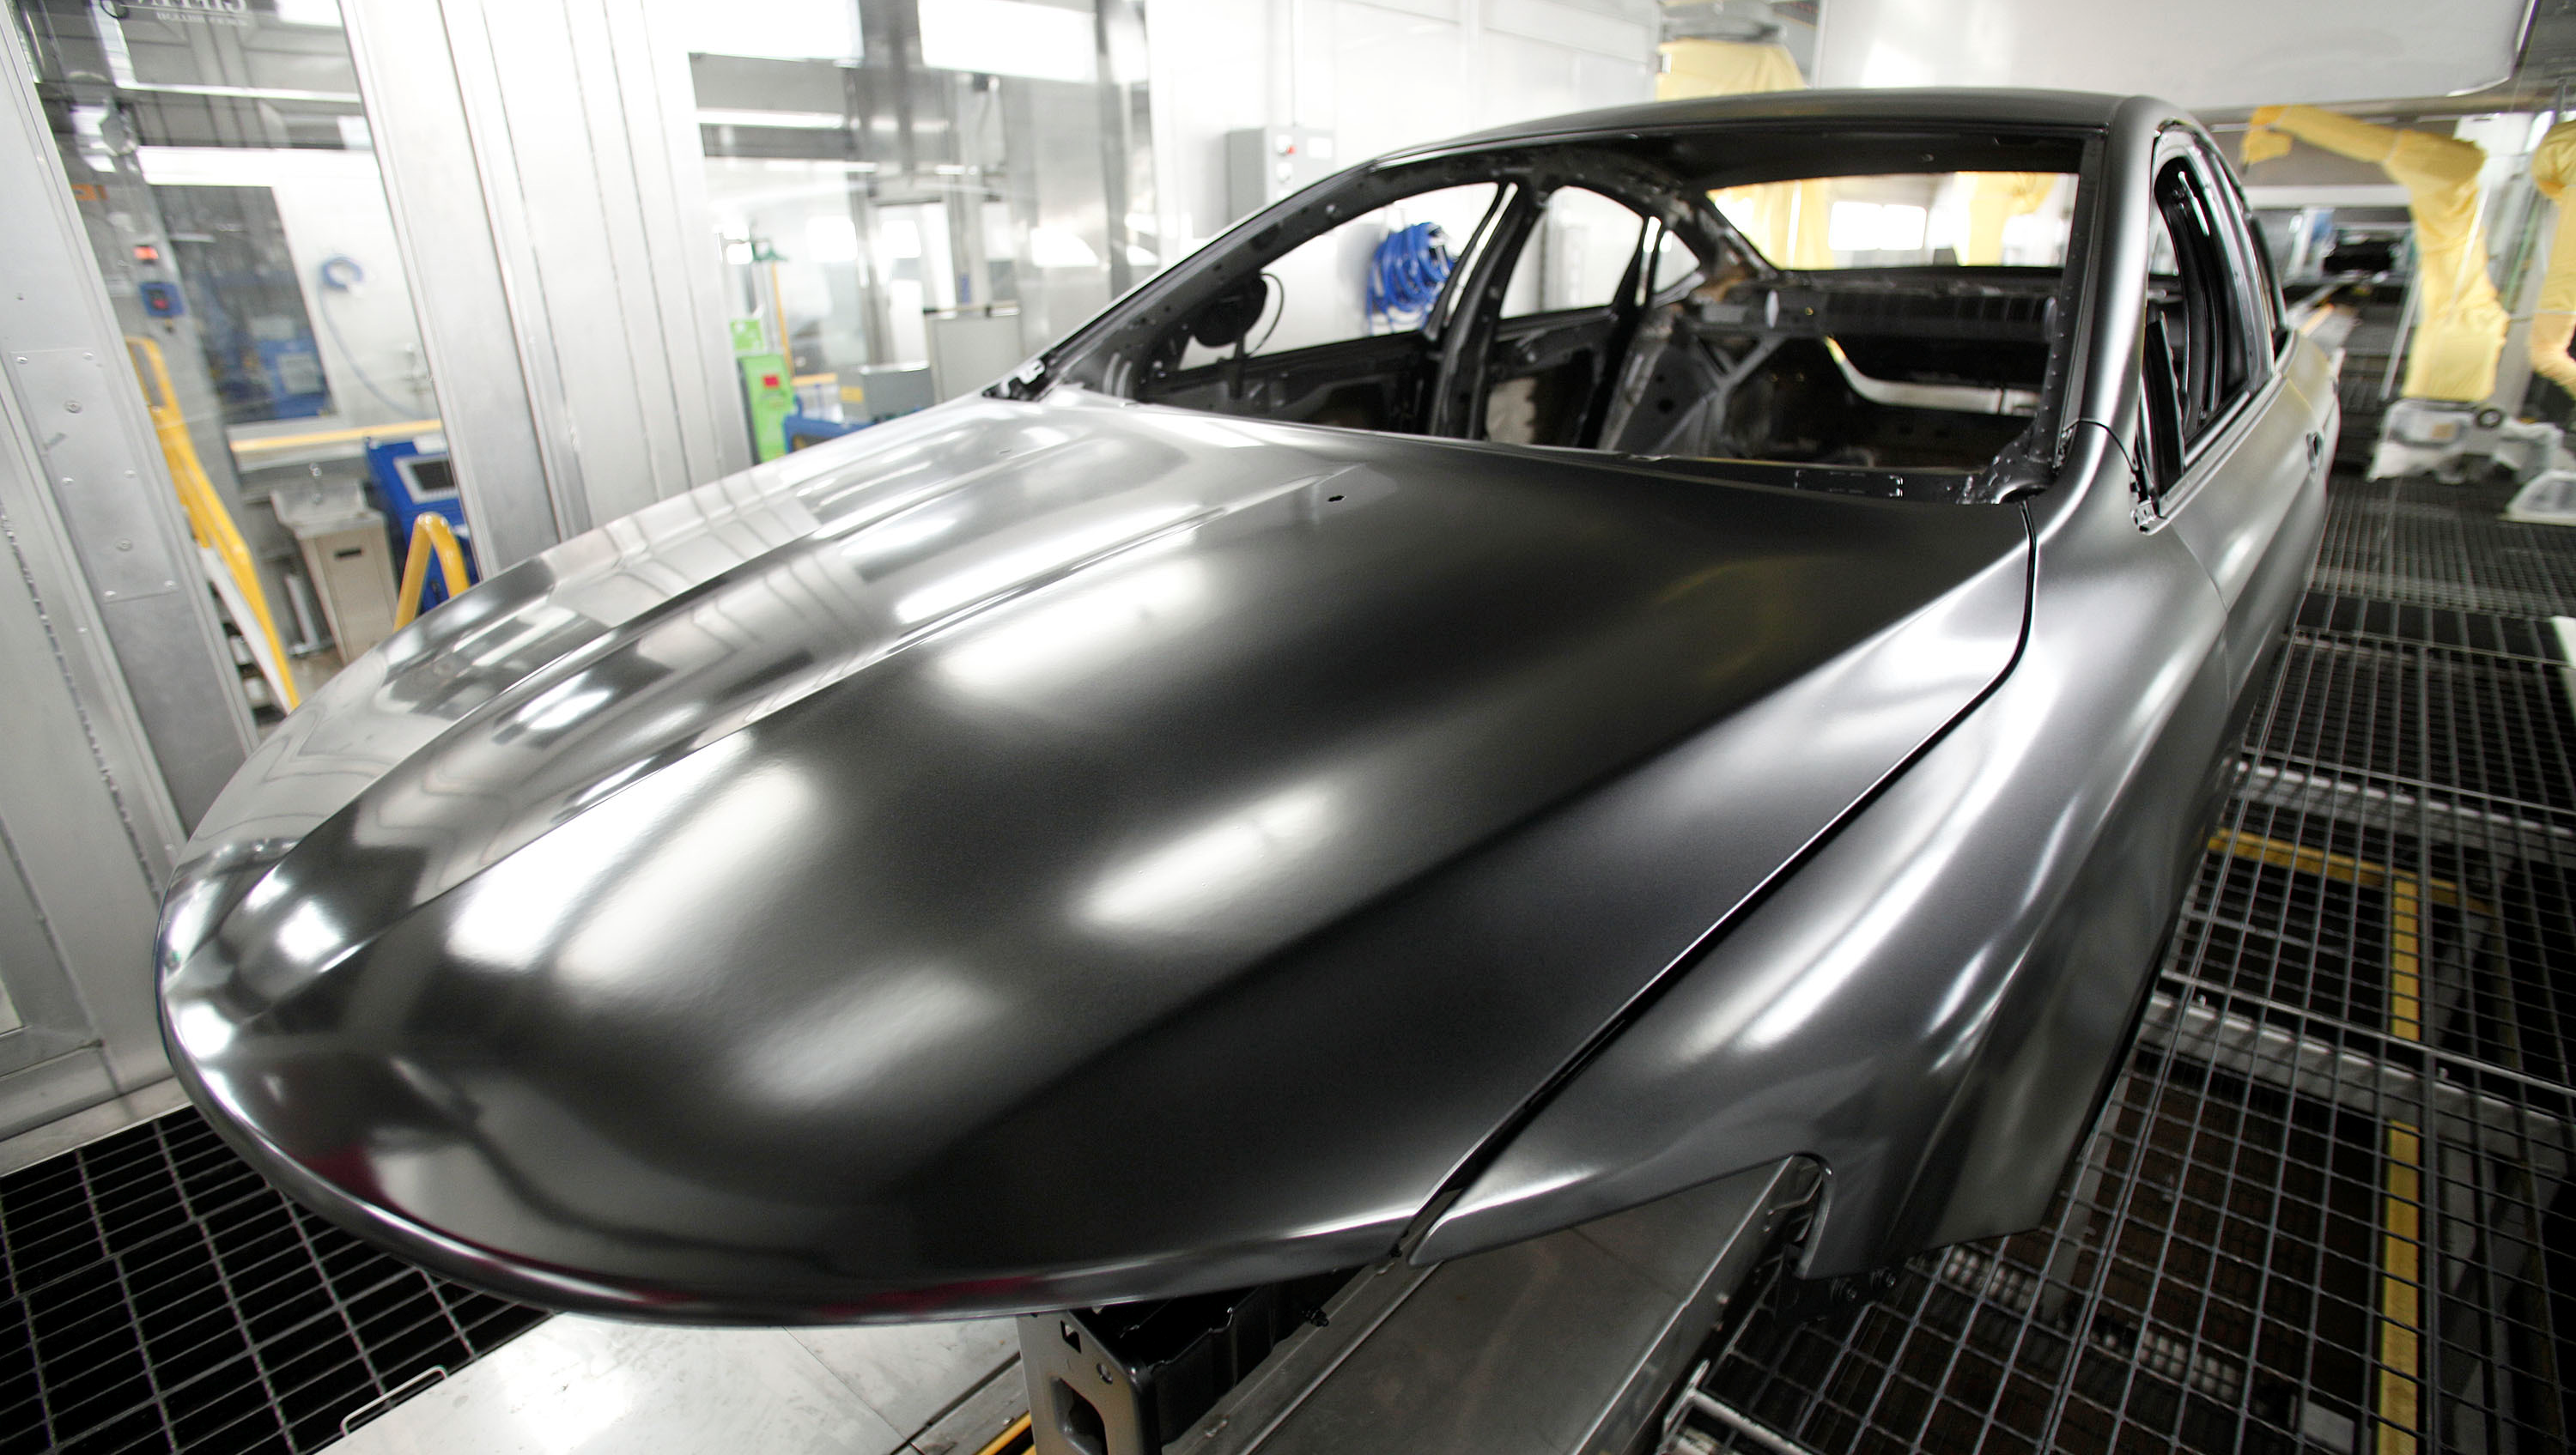 A 2015 Chrysler 200 undergoes painting at the Sterling Heights Assembly Plant March 14, 2014 in Sterling Heights, Michigan.